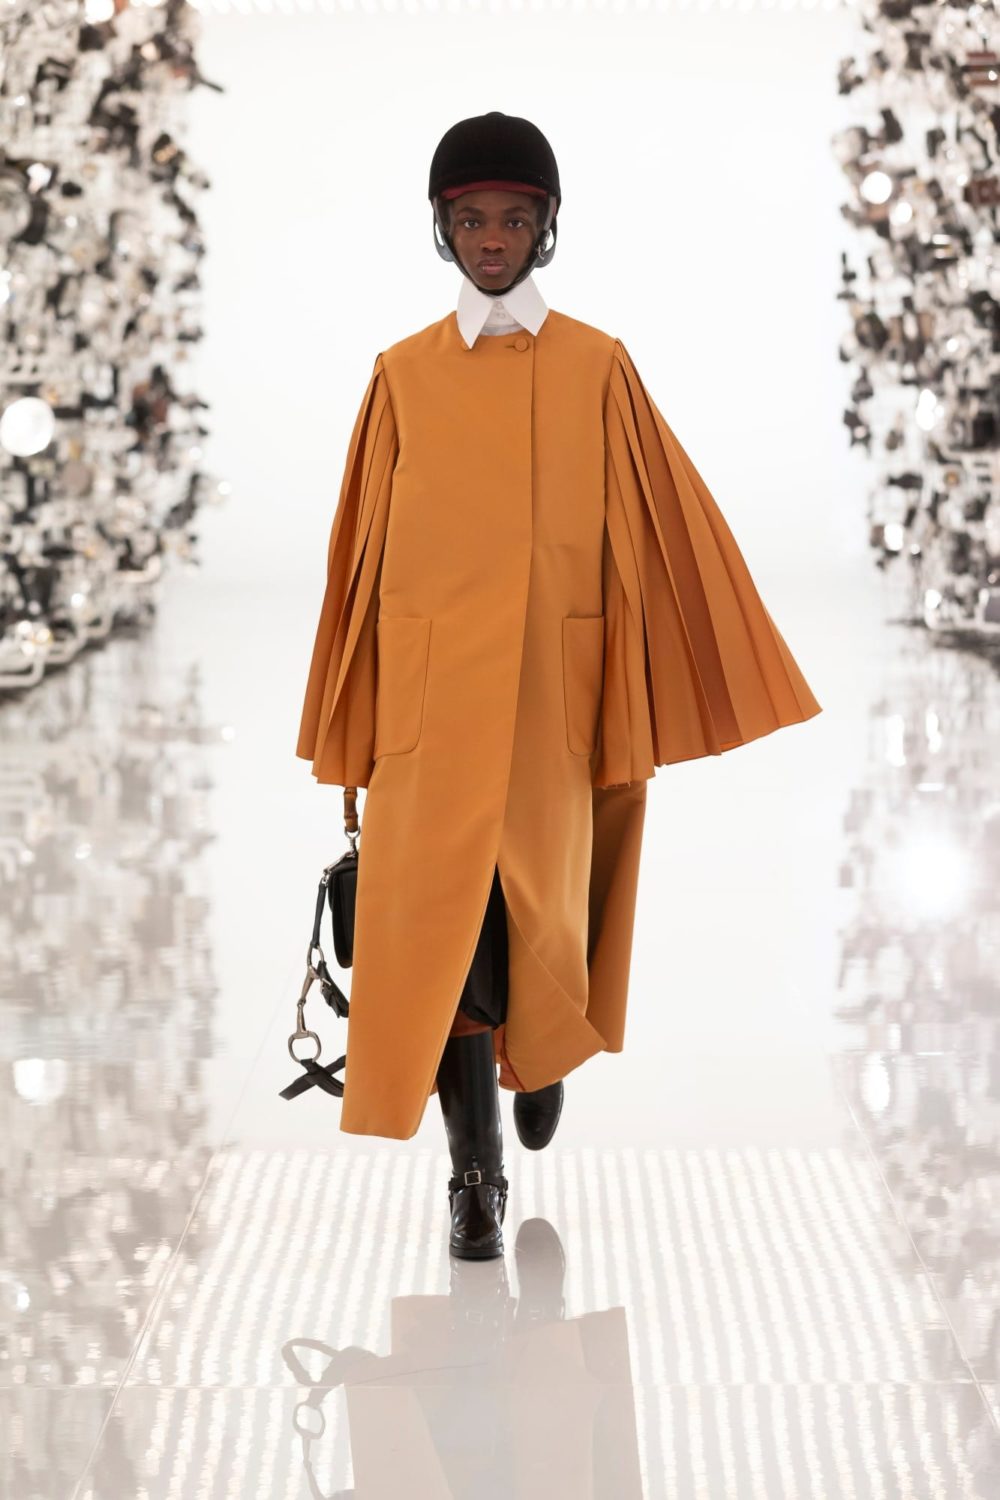 gucci model in orange outfit